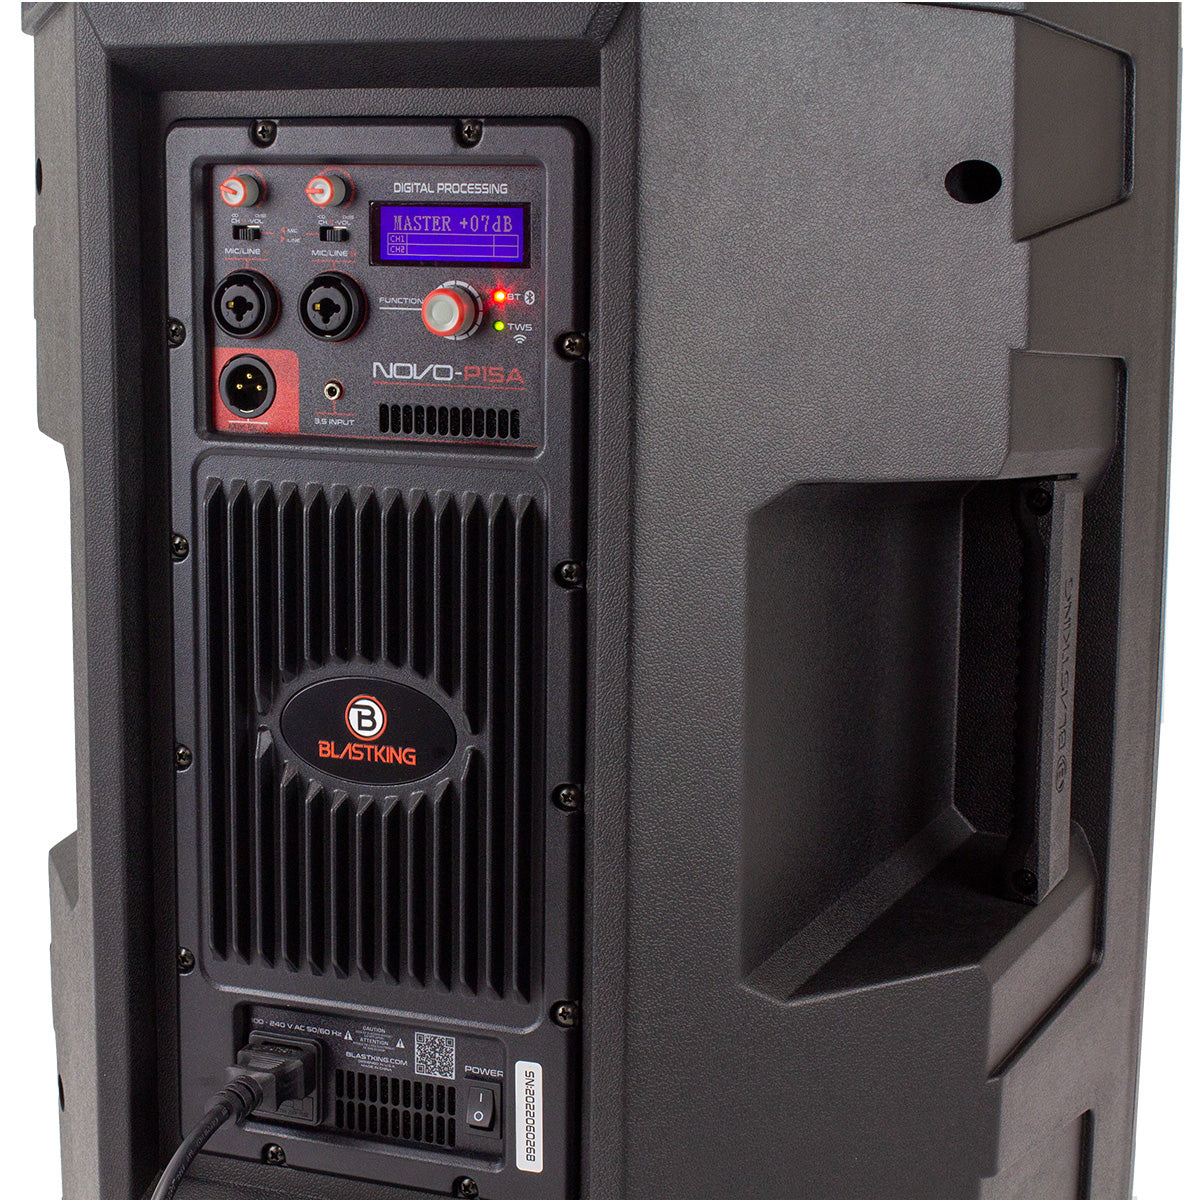 Blastking NOVOP15A-PK2 (2) 15” NOVO-P15A Speaker 1200 Watts + 18” Active Subwoofer 1500 Watts  + 12 Channel Analog Mixing Console + Stands + Cables